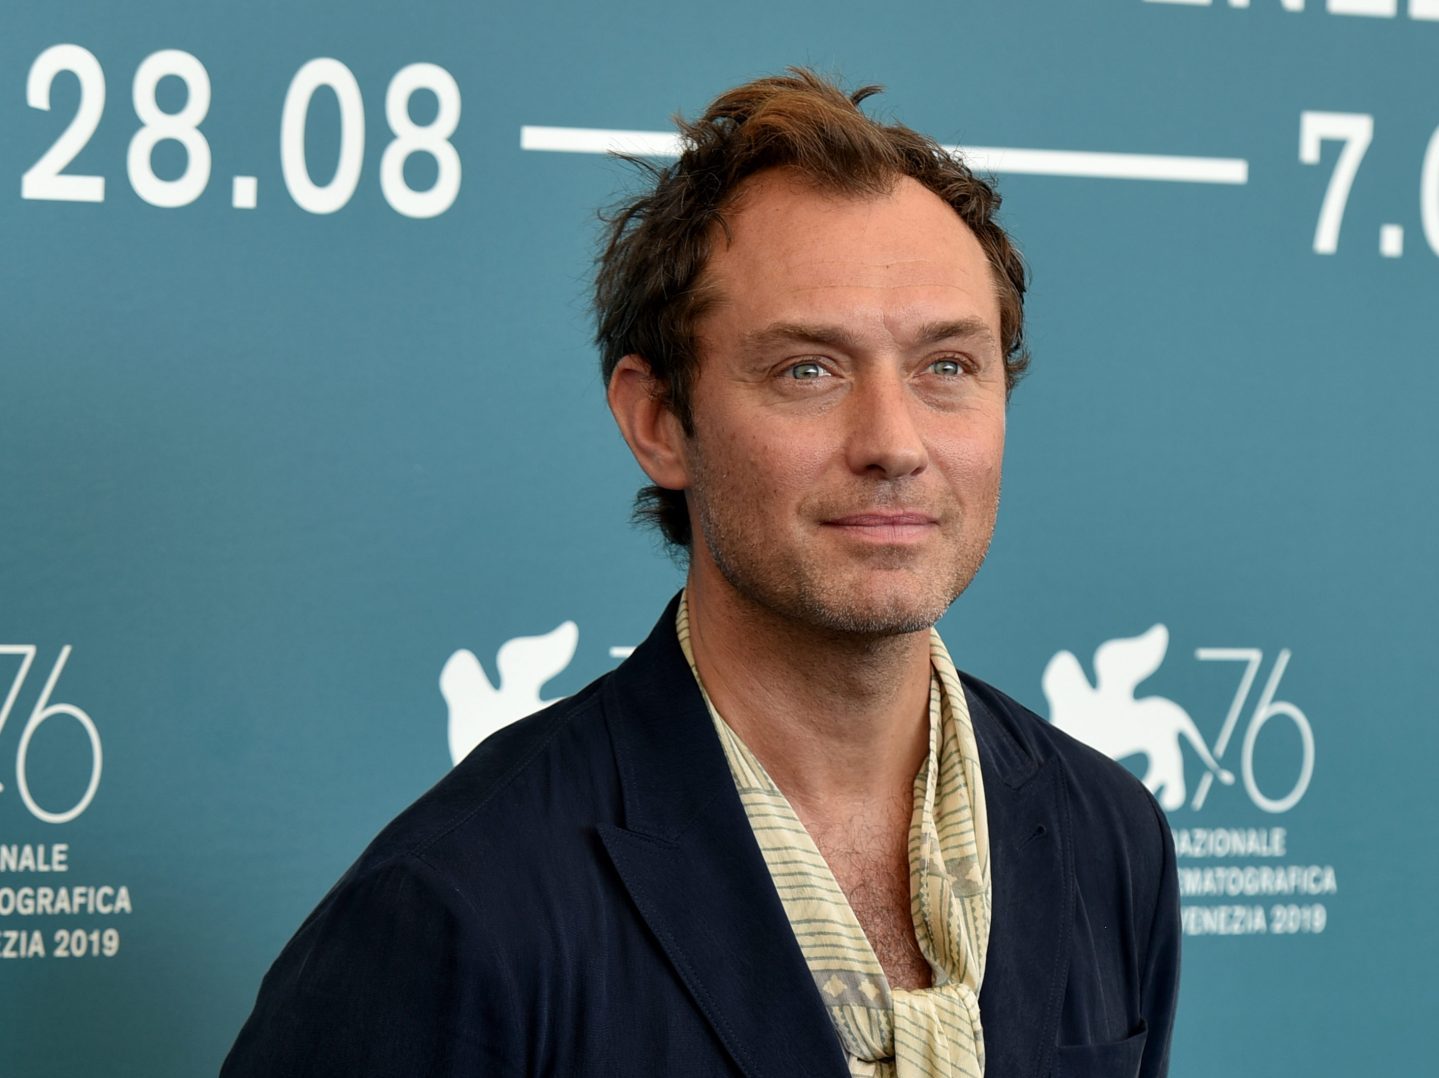 jude Law Learned To Cook Vegetarian Meals For His Kids – Sheknows